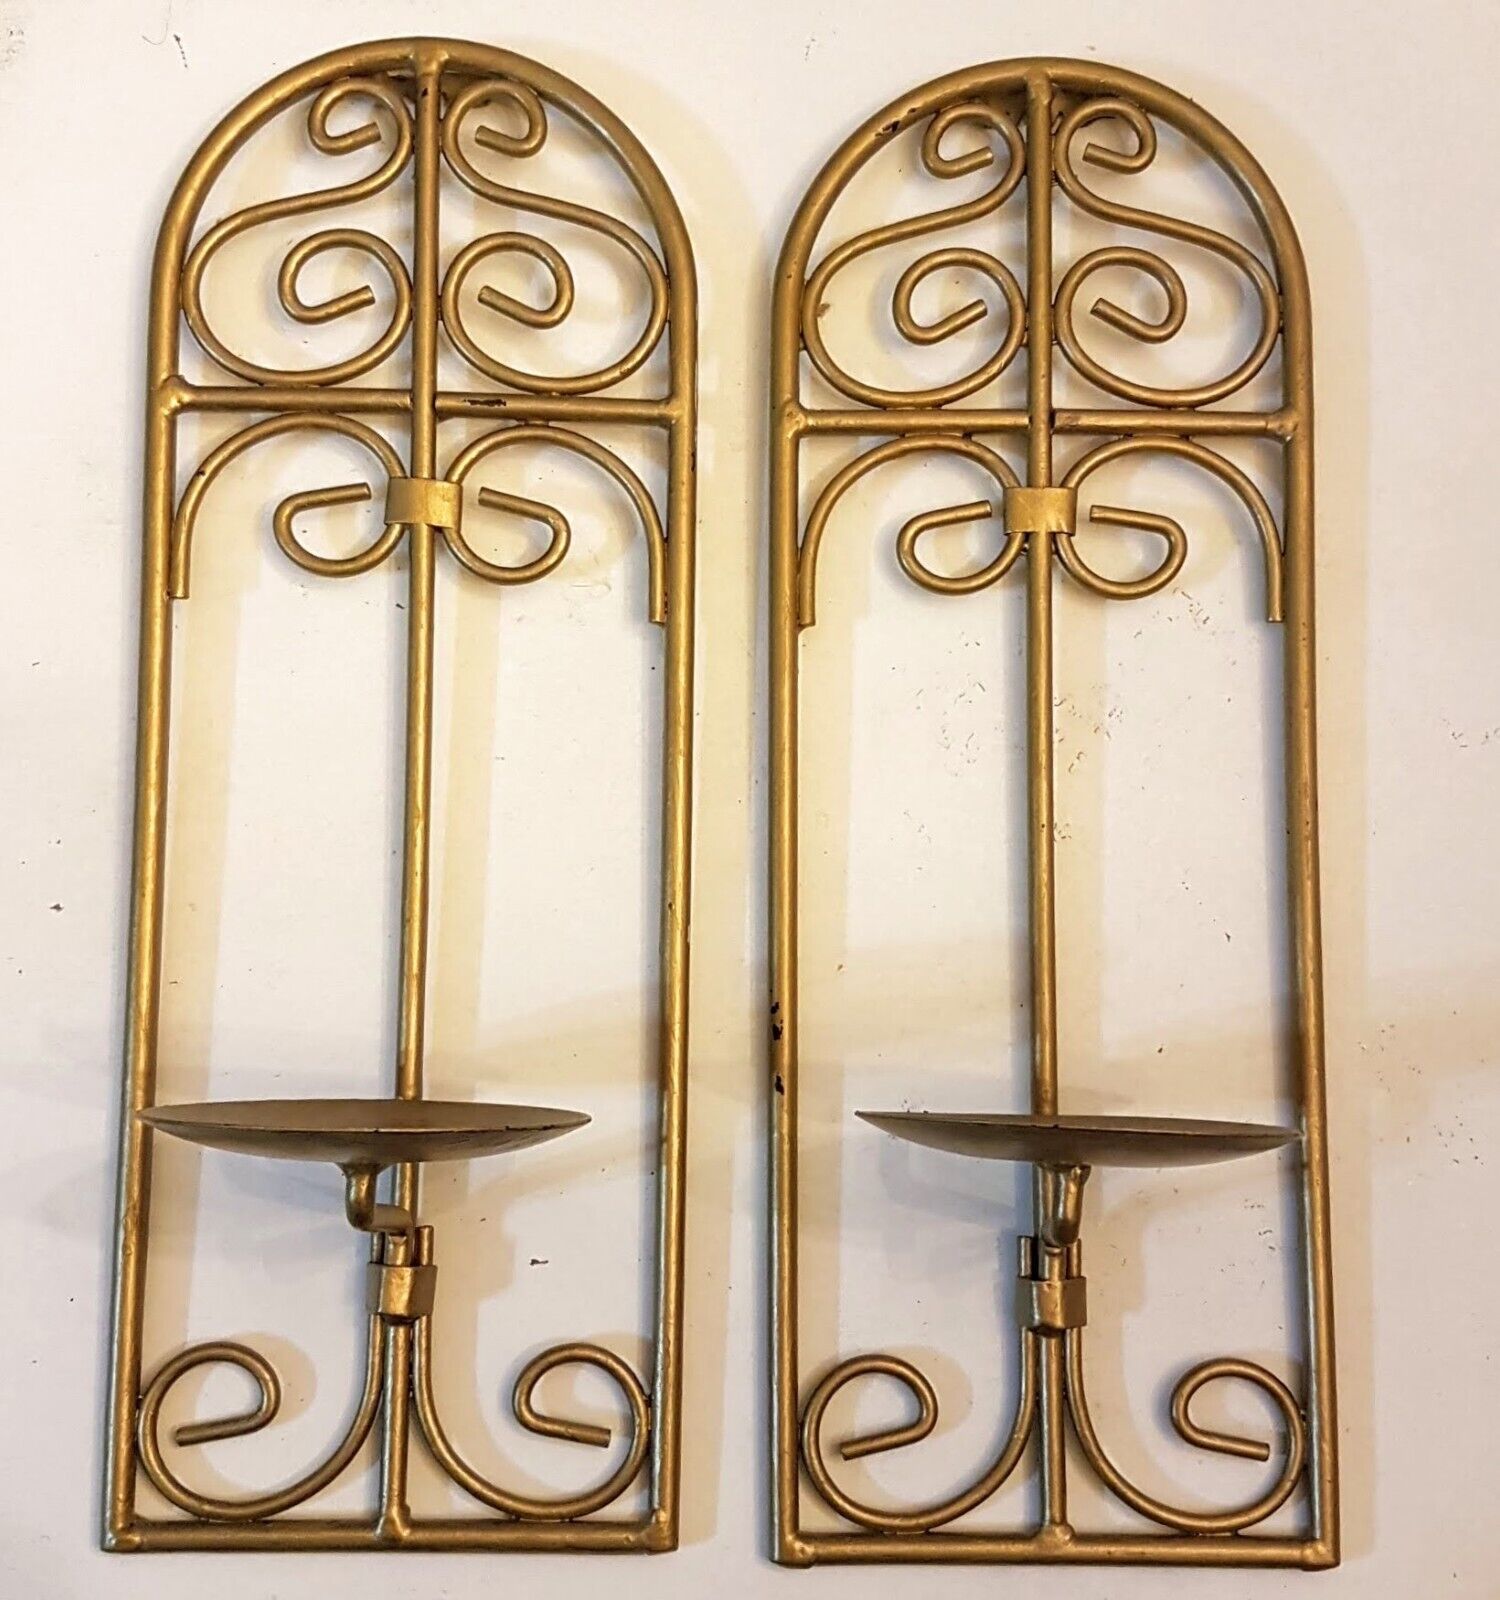 Primary image for Metal Wall Sconce LOT of 2 Matte Gold tone Scroll Work Candle Holder Home Decor